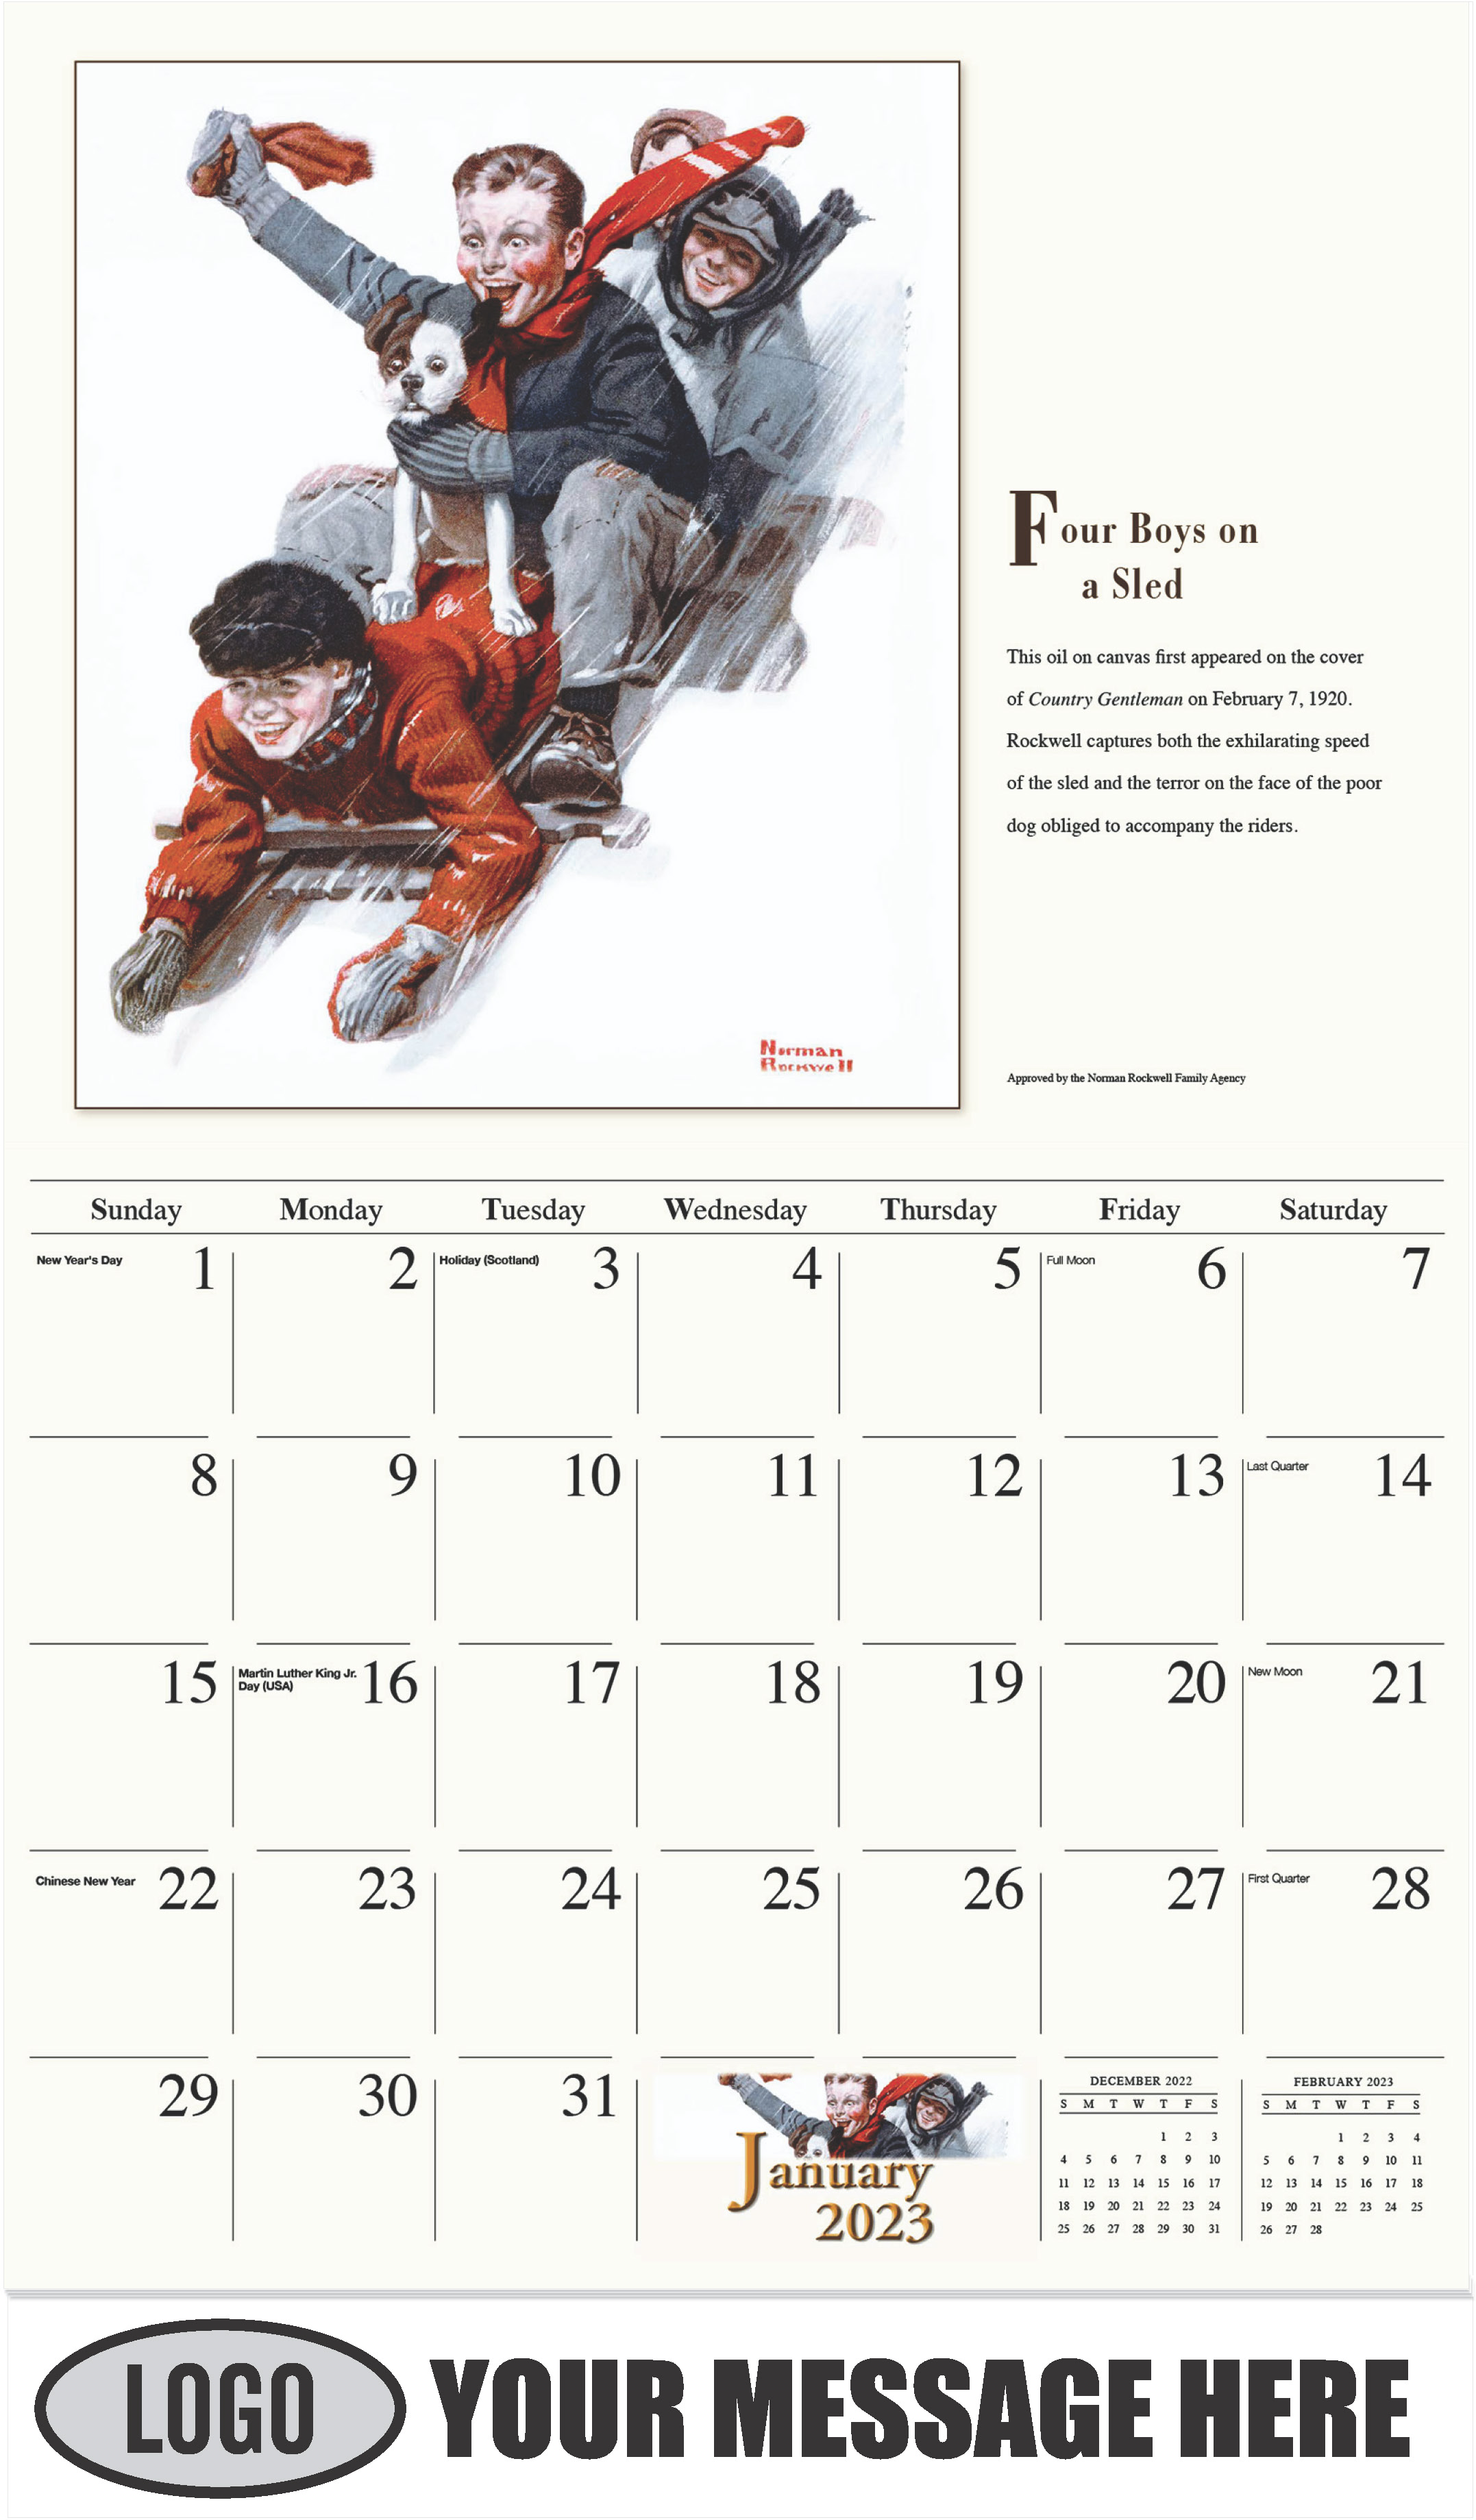 Four Boys on a Sled - January - Norman Rockwell - Memorable Images 2023 Promotional Calendar